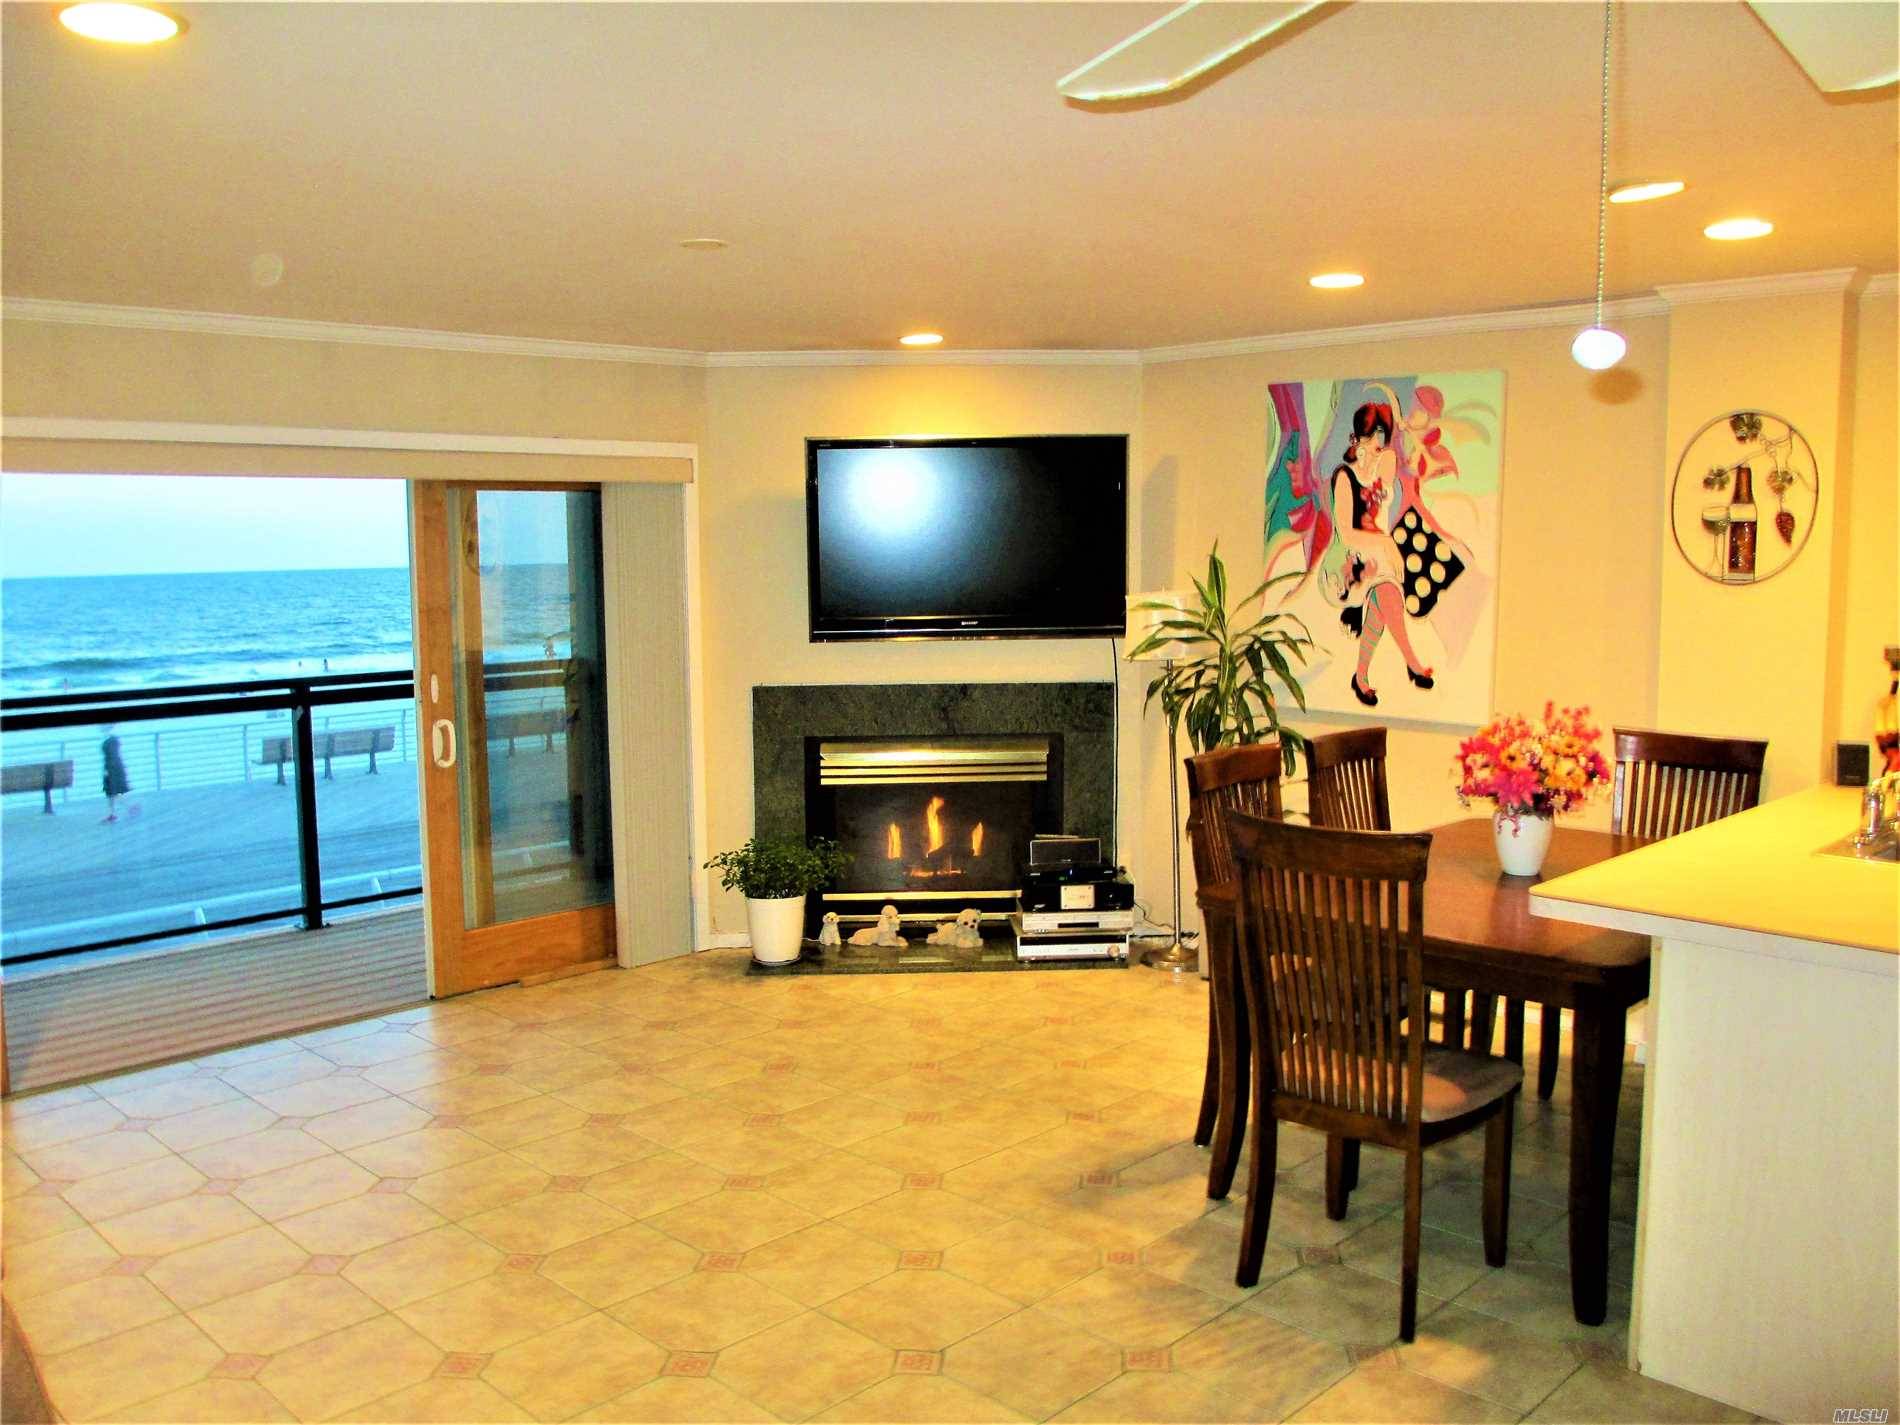 Totally Renovated Exterior And Interior 3 Bed 3 Bath Duplex Oceanfront Townhouse Directly On Ocean, Beach And Boardwalk.